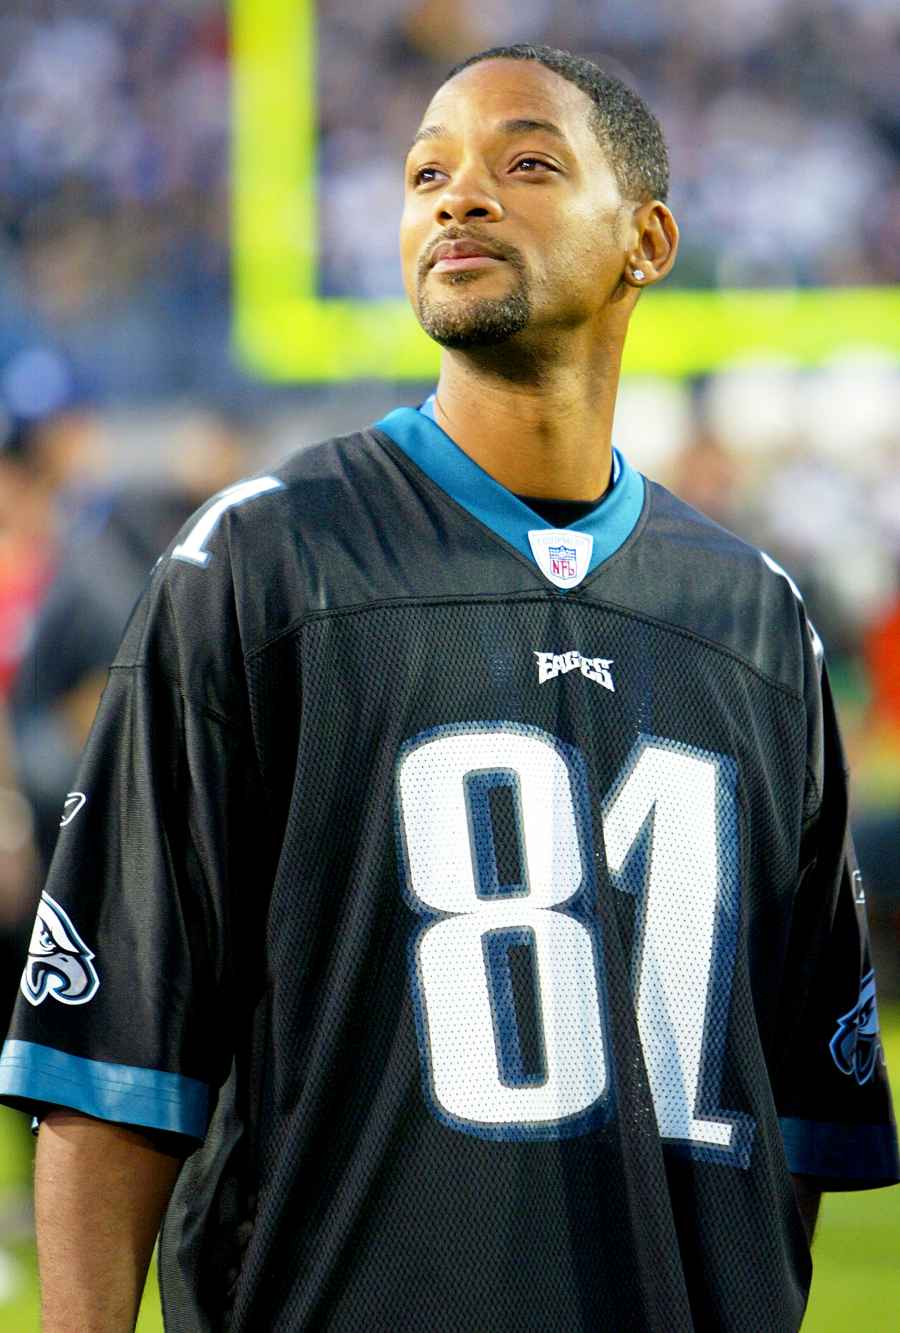 Will Smith attends the Super Bowl XXXIX between the New England Patriots and the Philadelphia Eagles at Alltel Stadium on February 6, 2005 in Jacksonville, Florida.